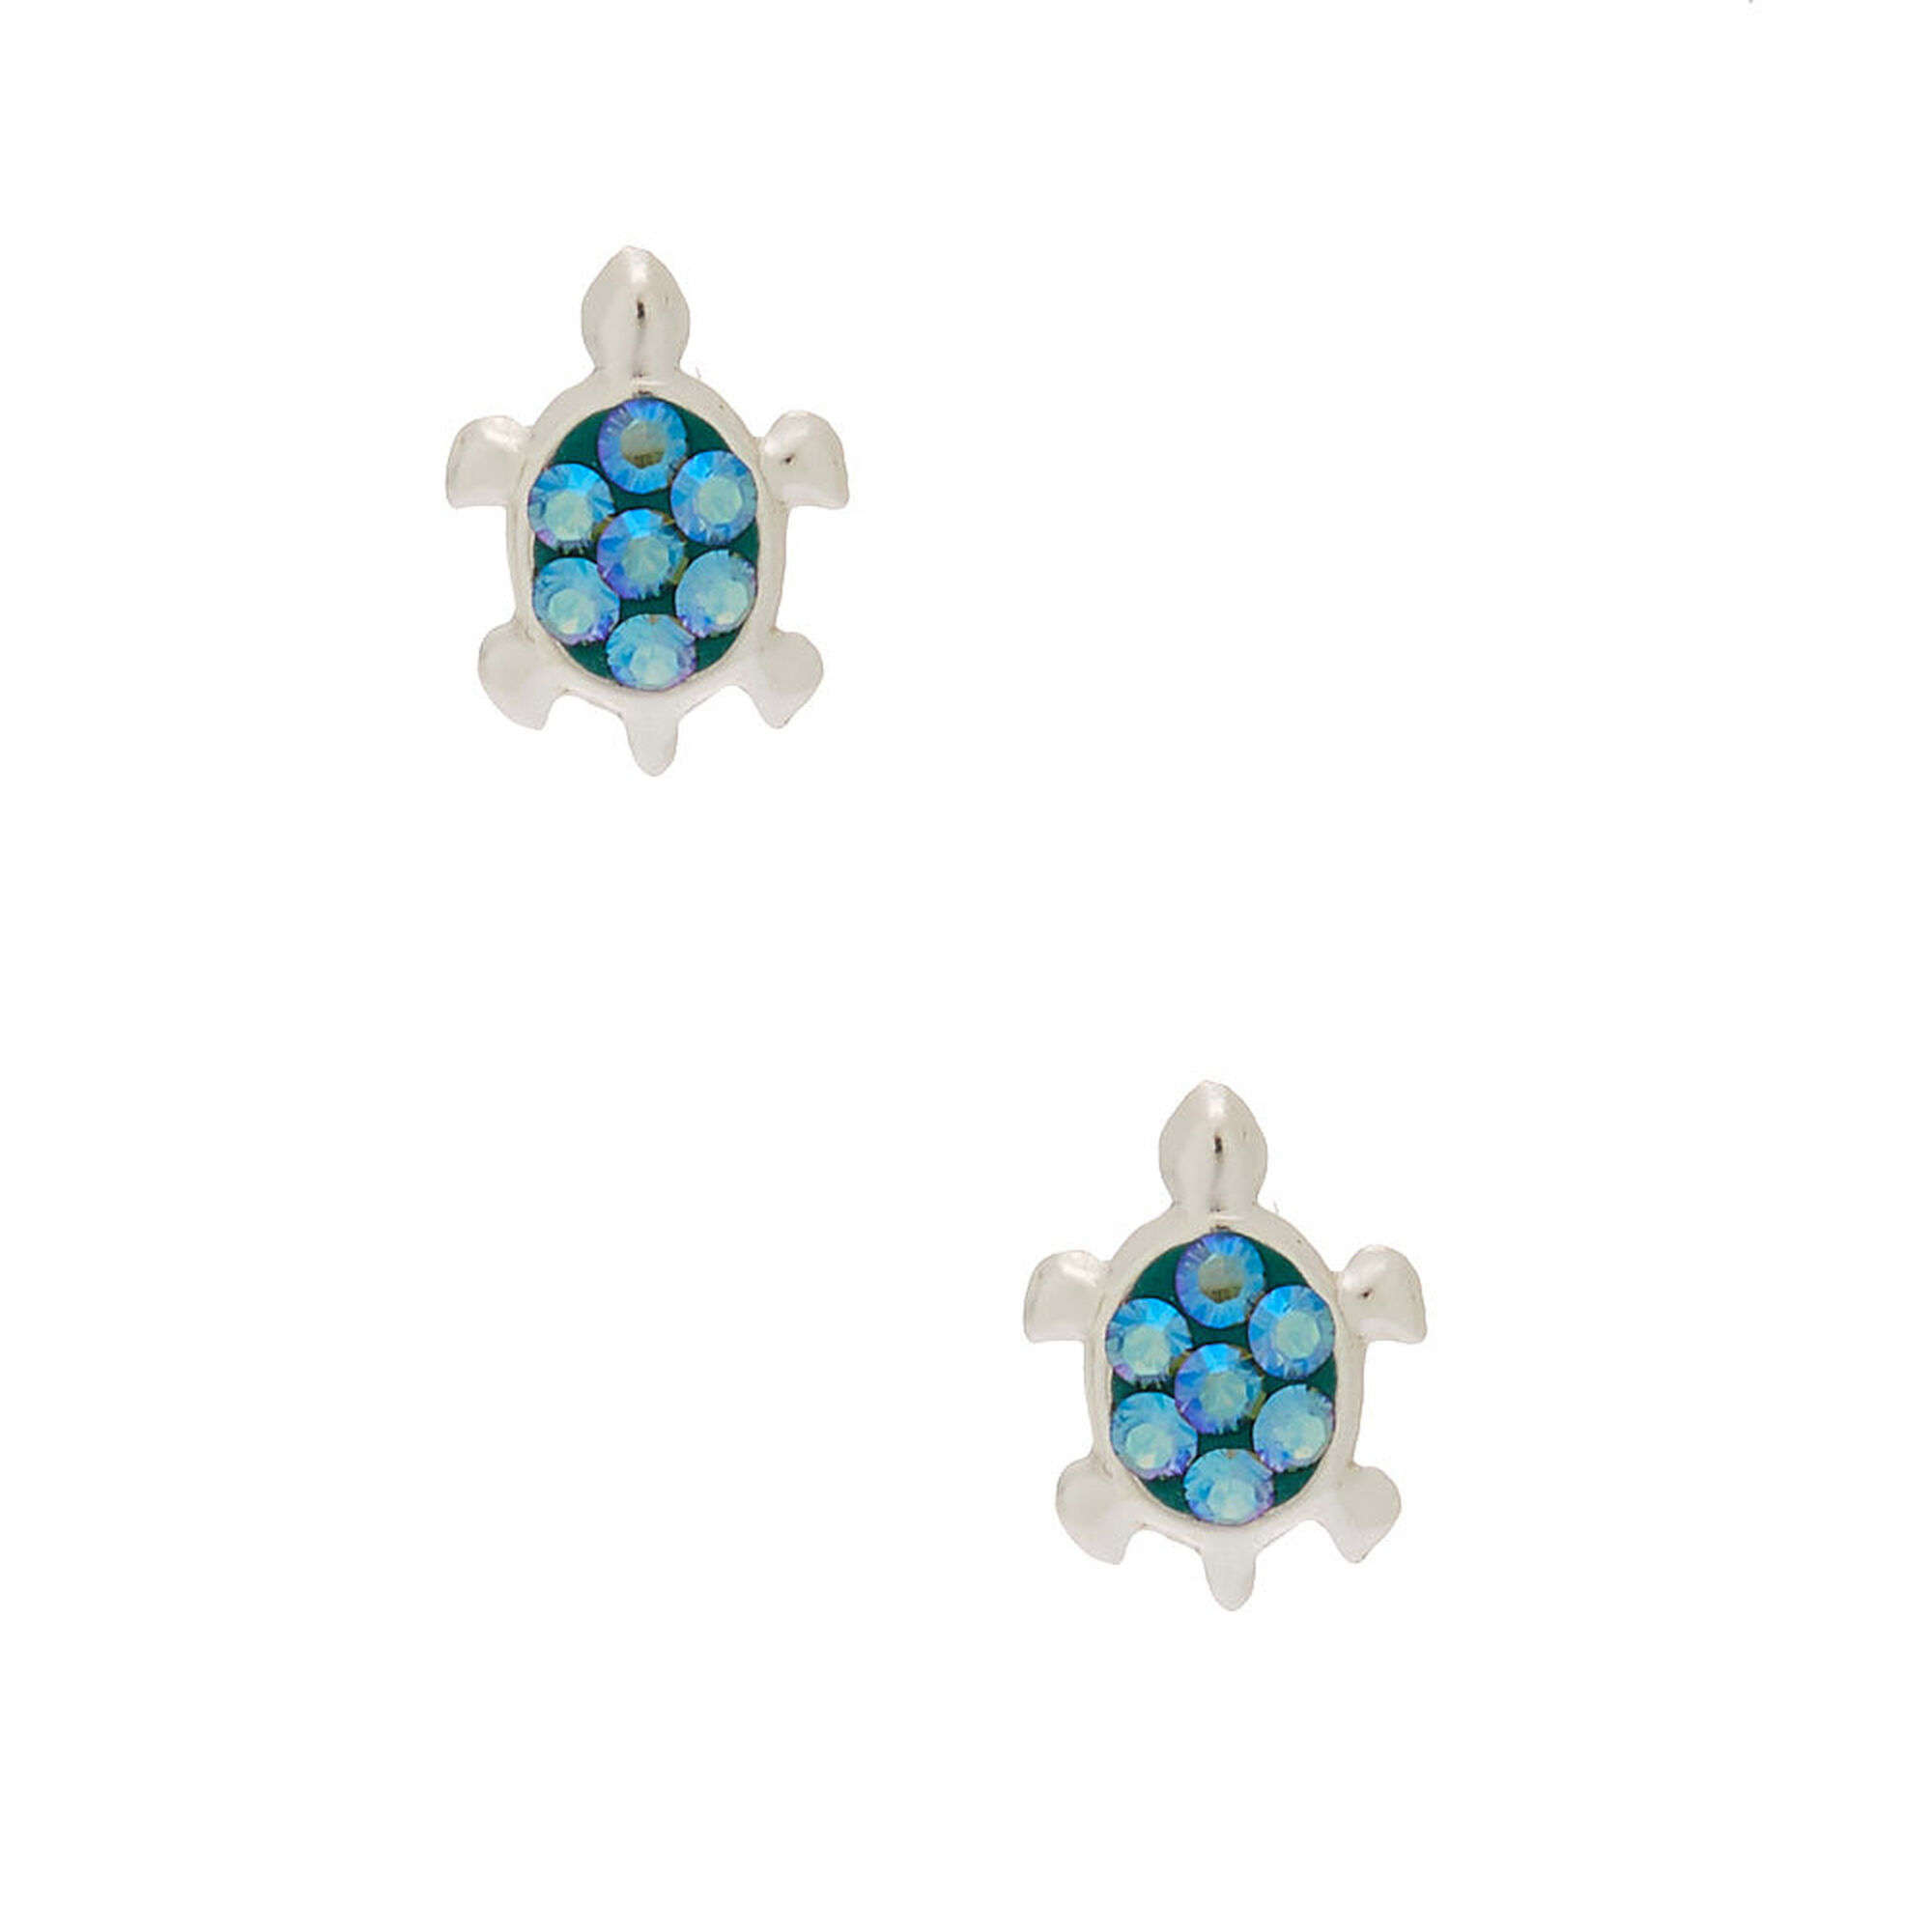 View Claires Sterling Silver Embellished Turtle Stud Earrings Turquoise information